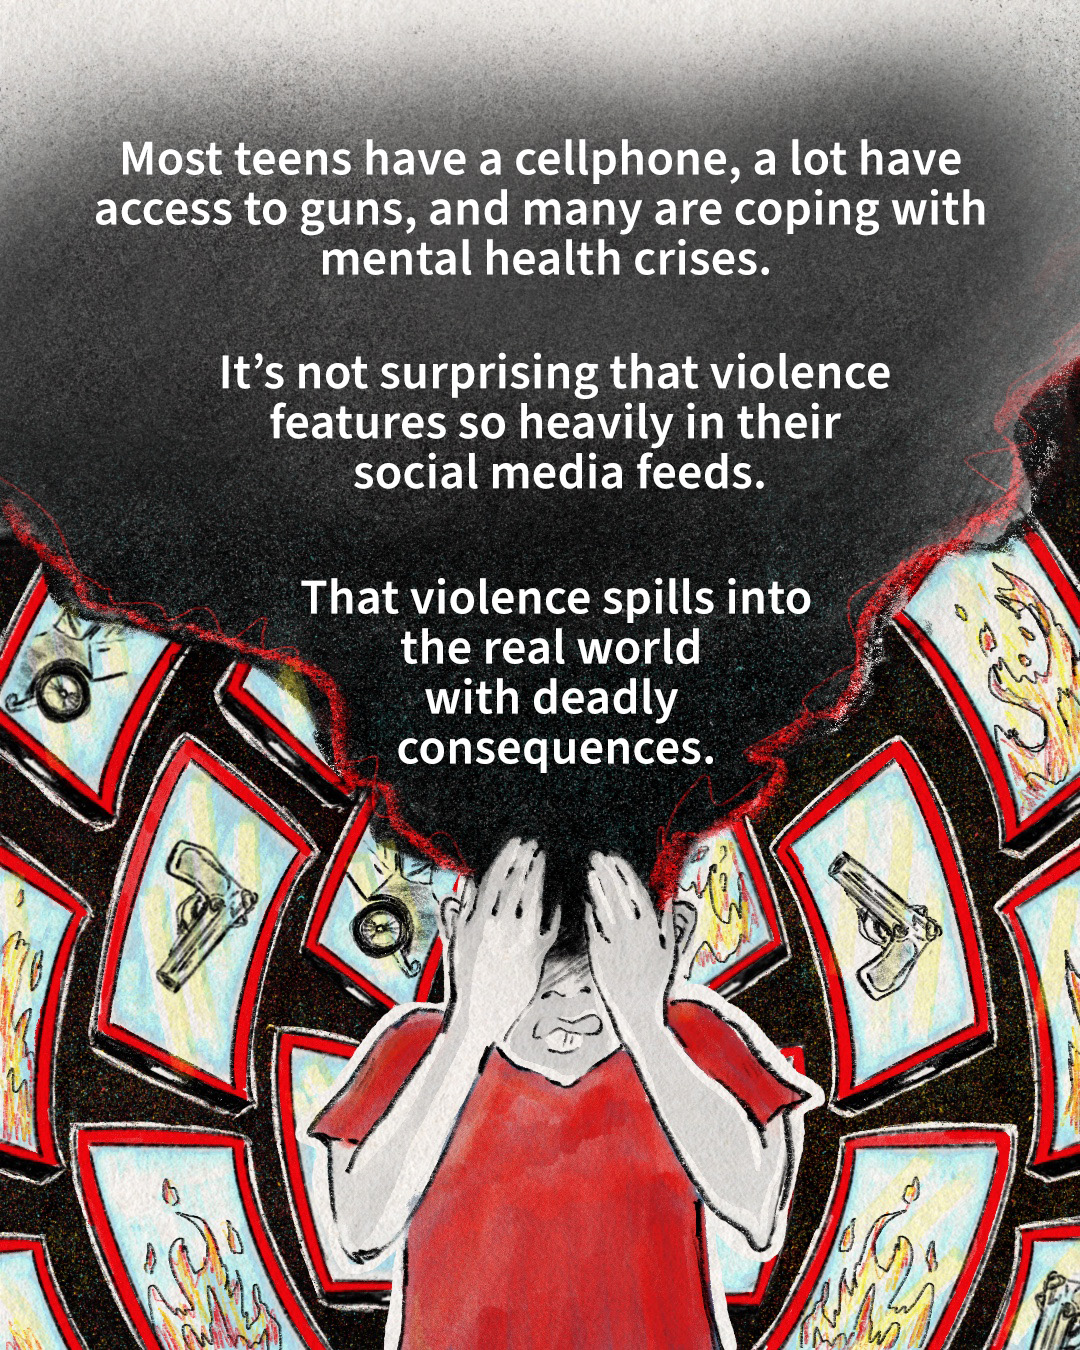 A digital drawing made with black pencil and red and neon-blue gouache. A teen figure covers their eyes with their hands as red smartphones with violent imagery swarm around them. Smoke covers the teen’s head and top of the screen. In that space, text reads: “Most teens have a cellphone, a lot have access to guns, and many are coping with mental health crises. It’s not surprising that violence features so heavily in their social media feeds. That violence spills into the real world with deadly consequences.”